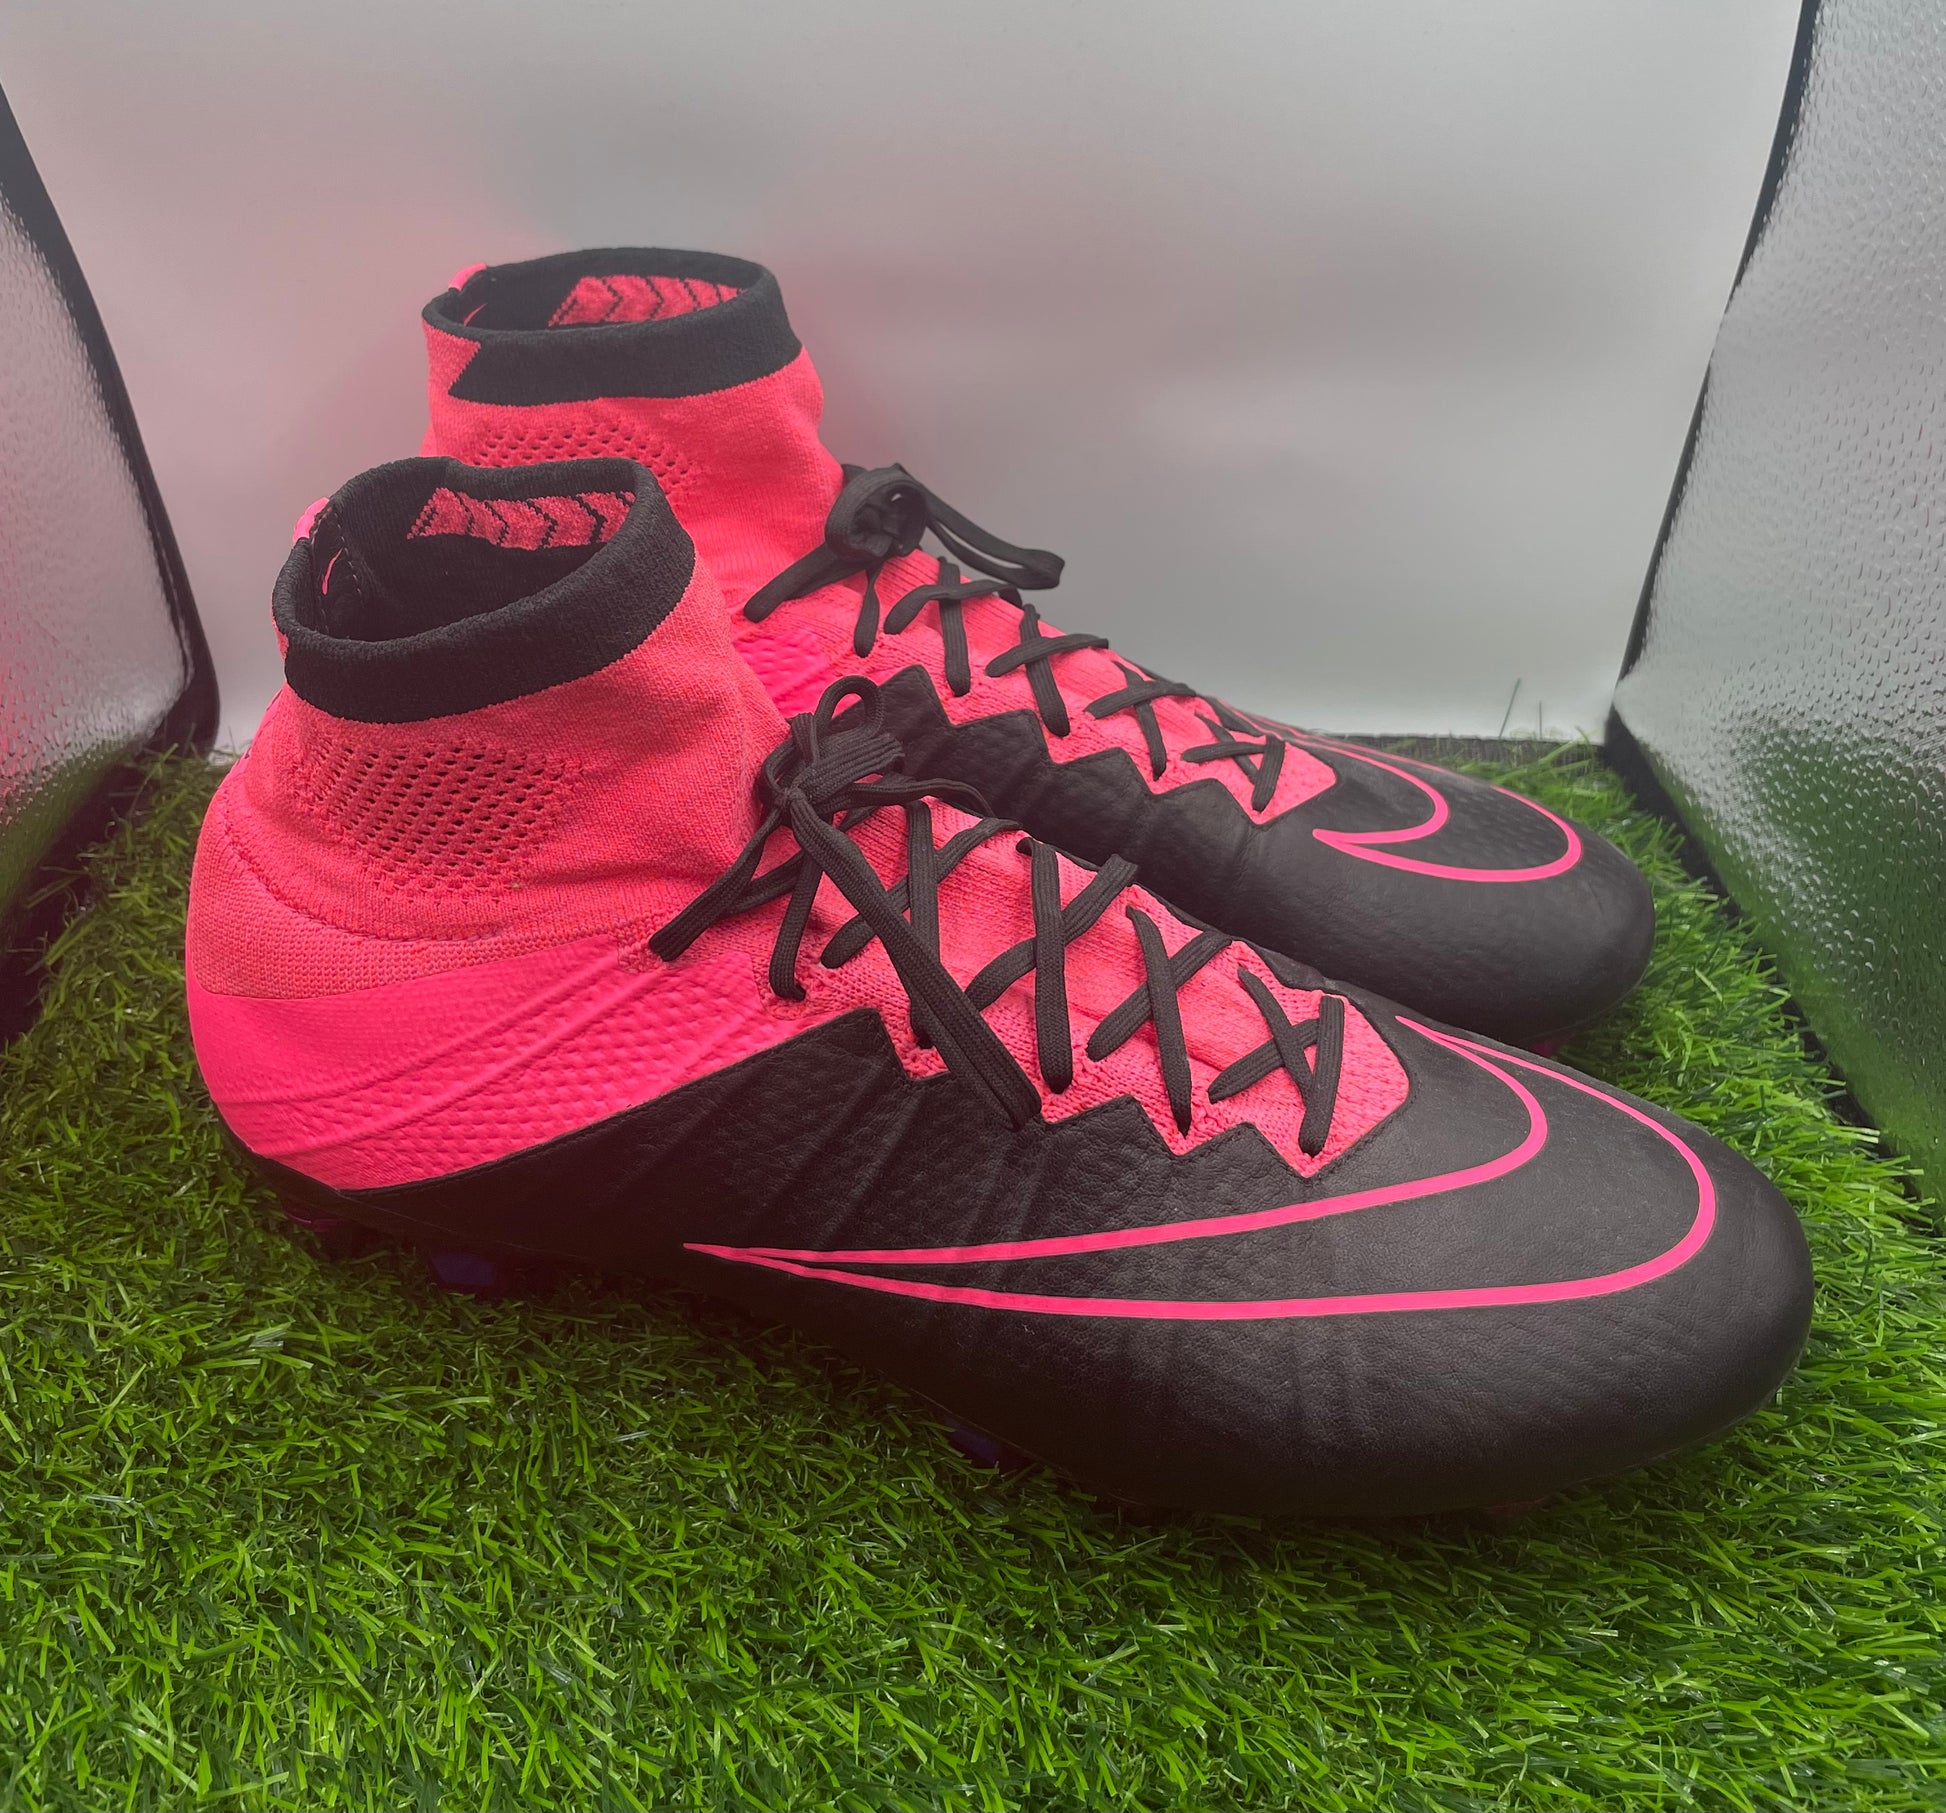 Nike superfly 3 pink/black SG – boots